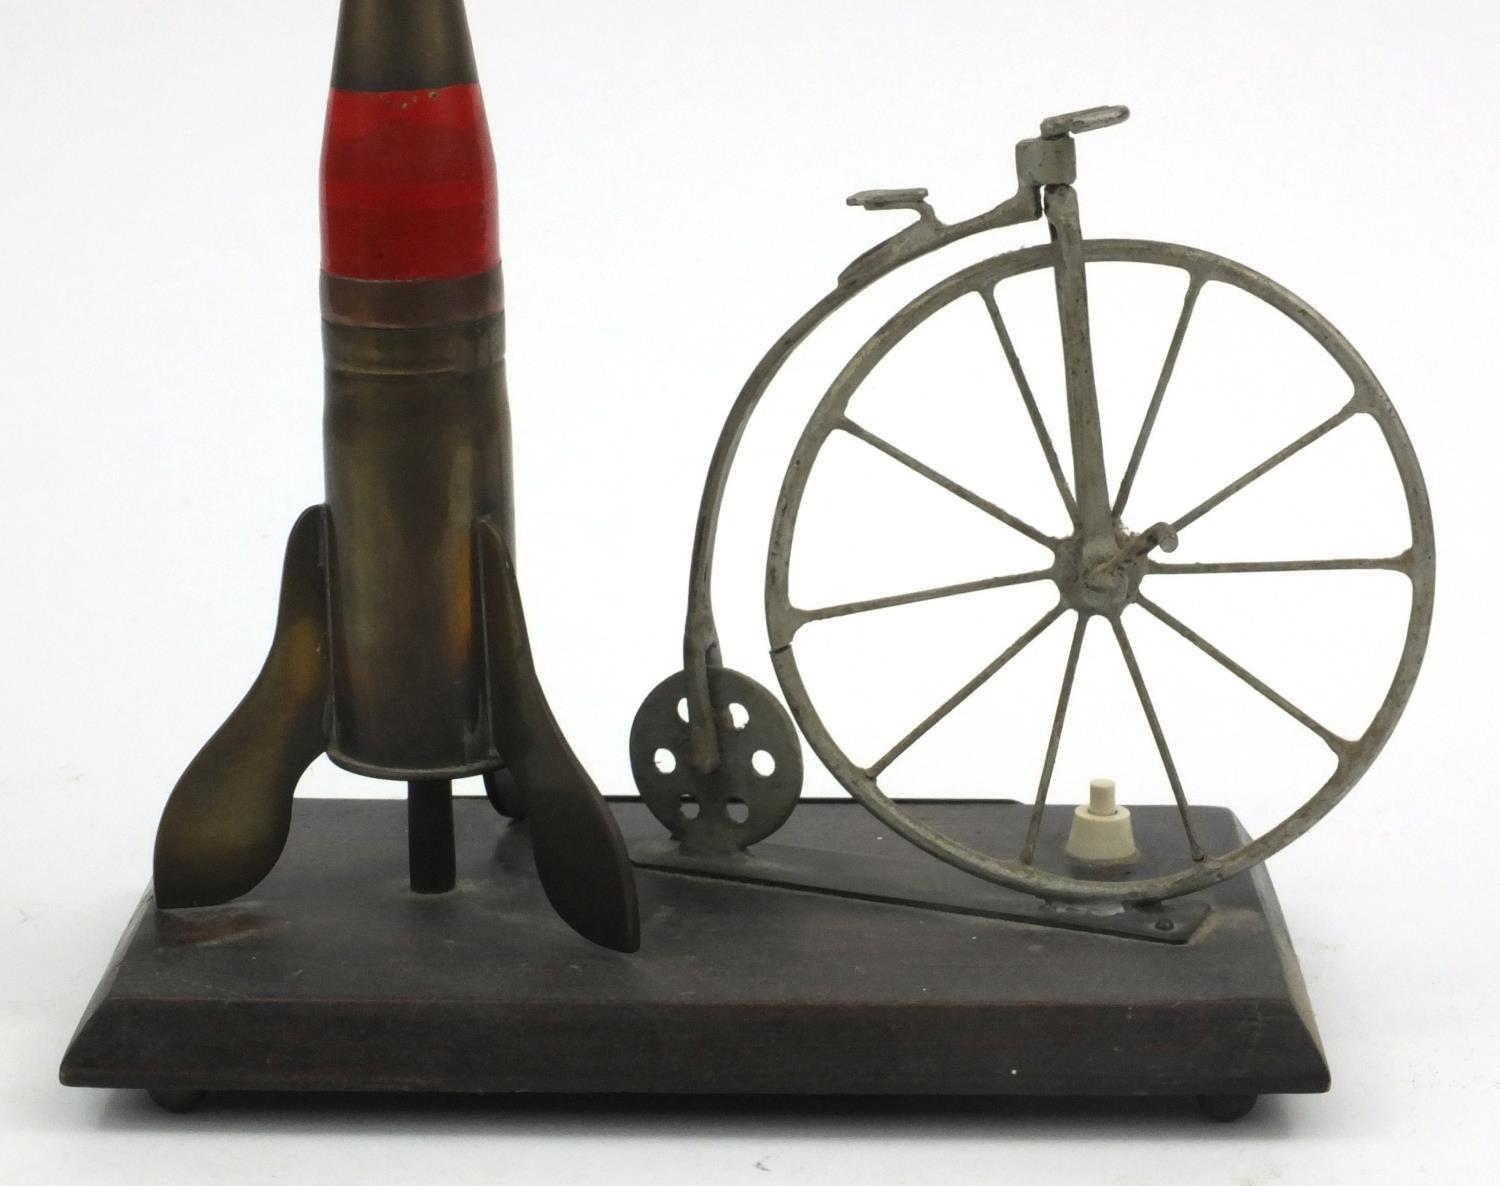 Military interest trench art table light titled 'Travel Through The Ages', raised on an oak base, - Image 9 of 11